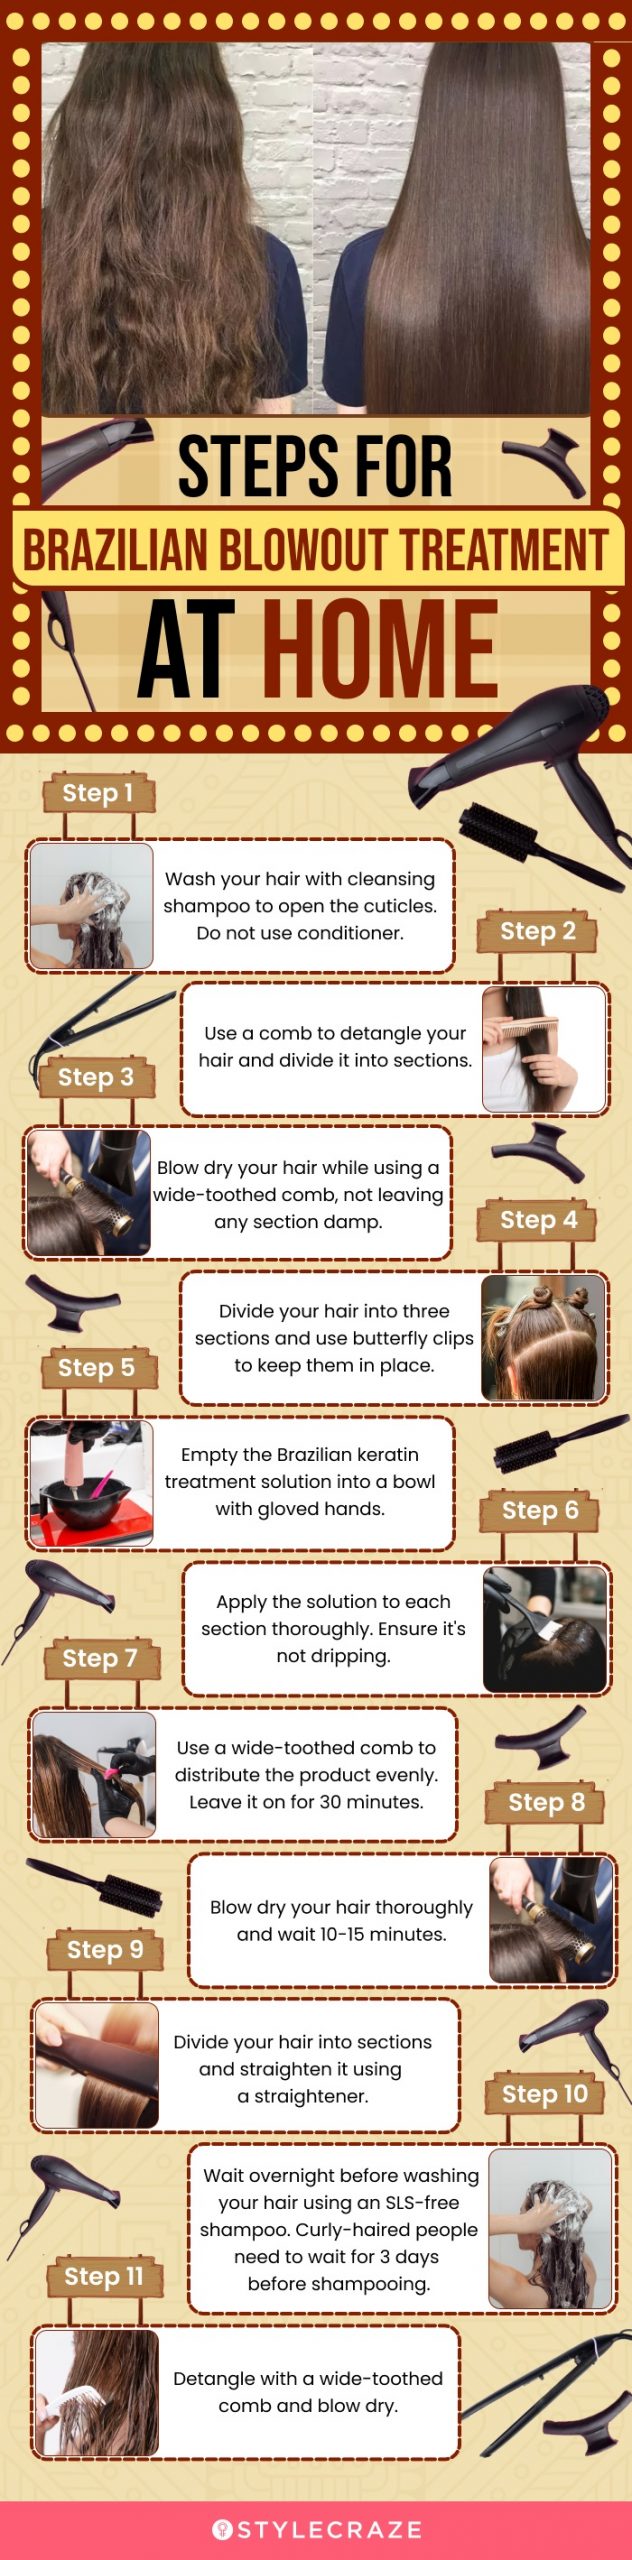 steps for brazilian blowout treatment at home (infographic)